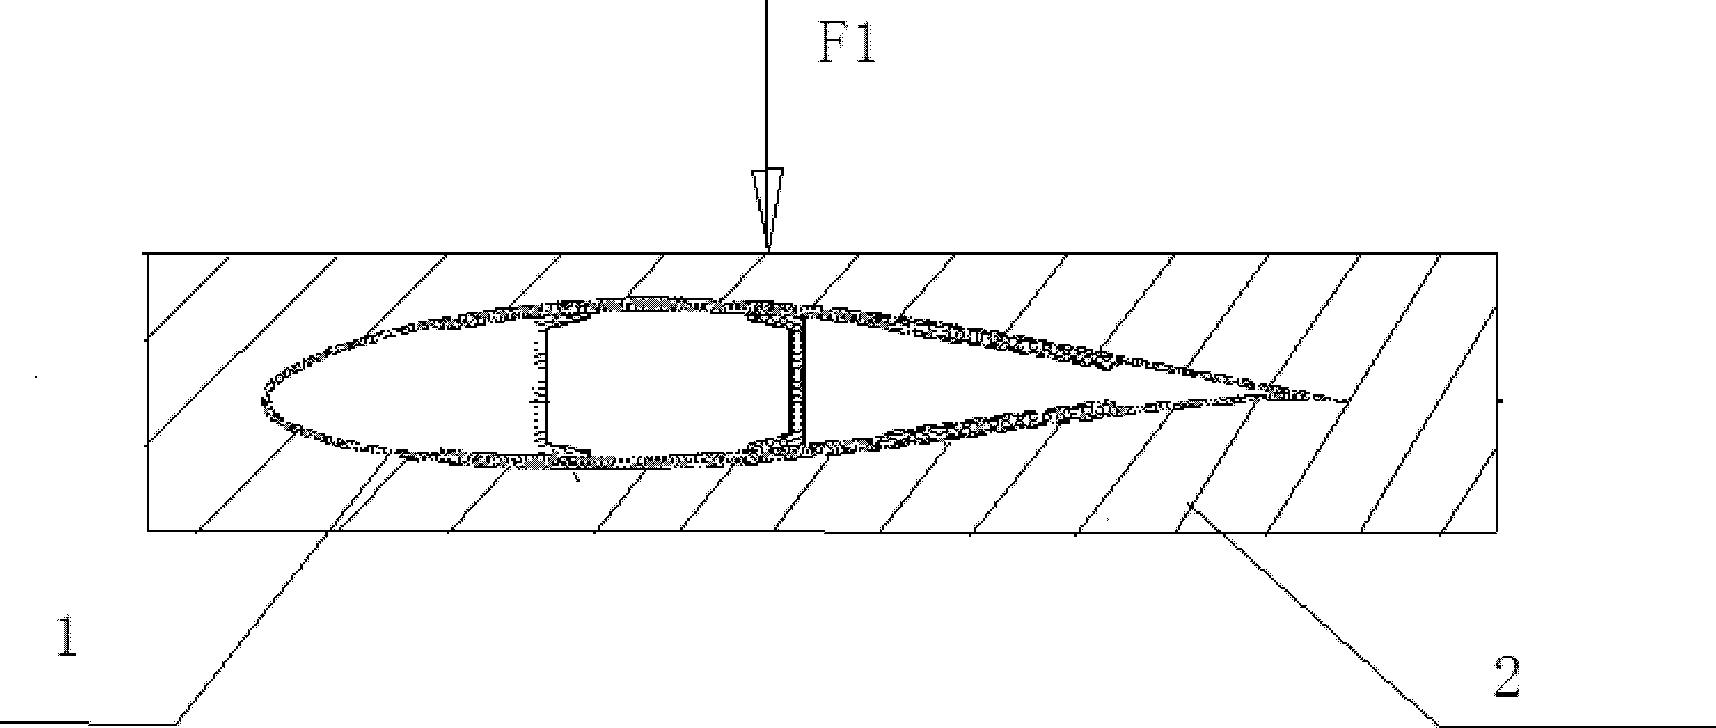 Evaluation method for fatigue damage and service life of horizontal axis wind turbine blade